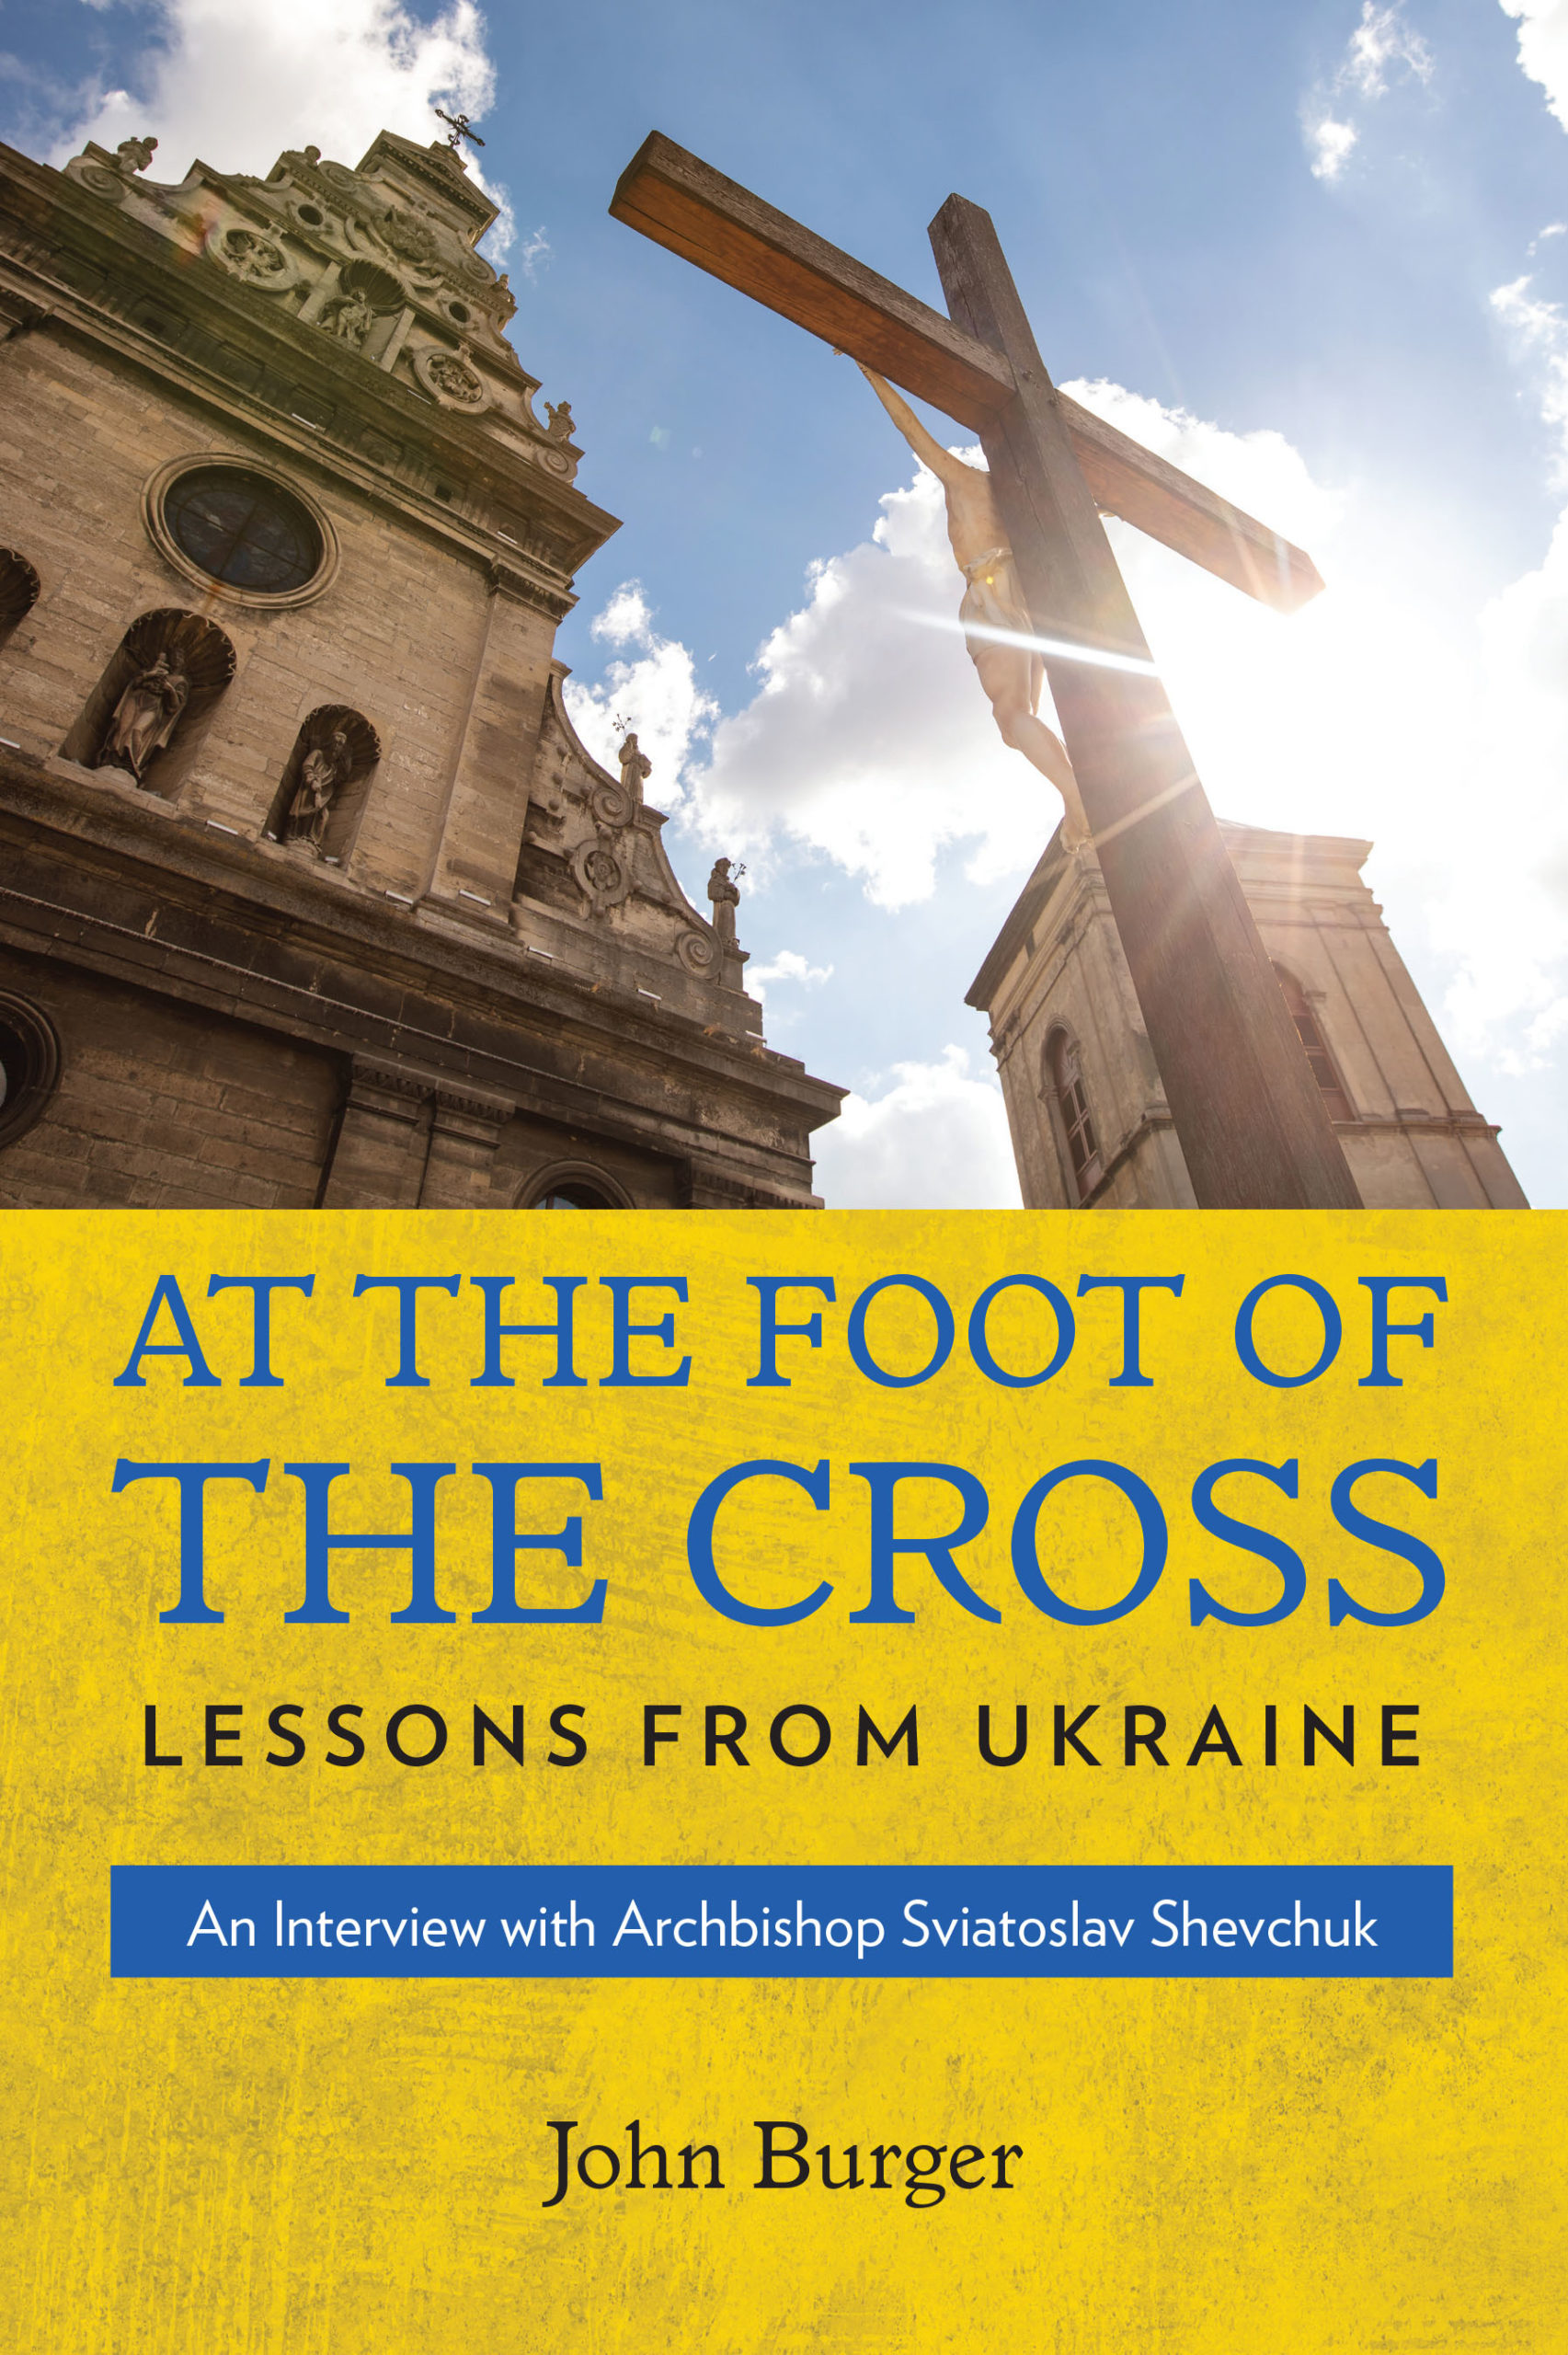 What the experience of Ukraine’s Church can teach American Catholics today